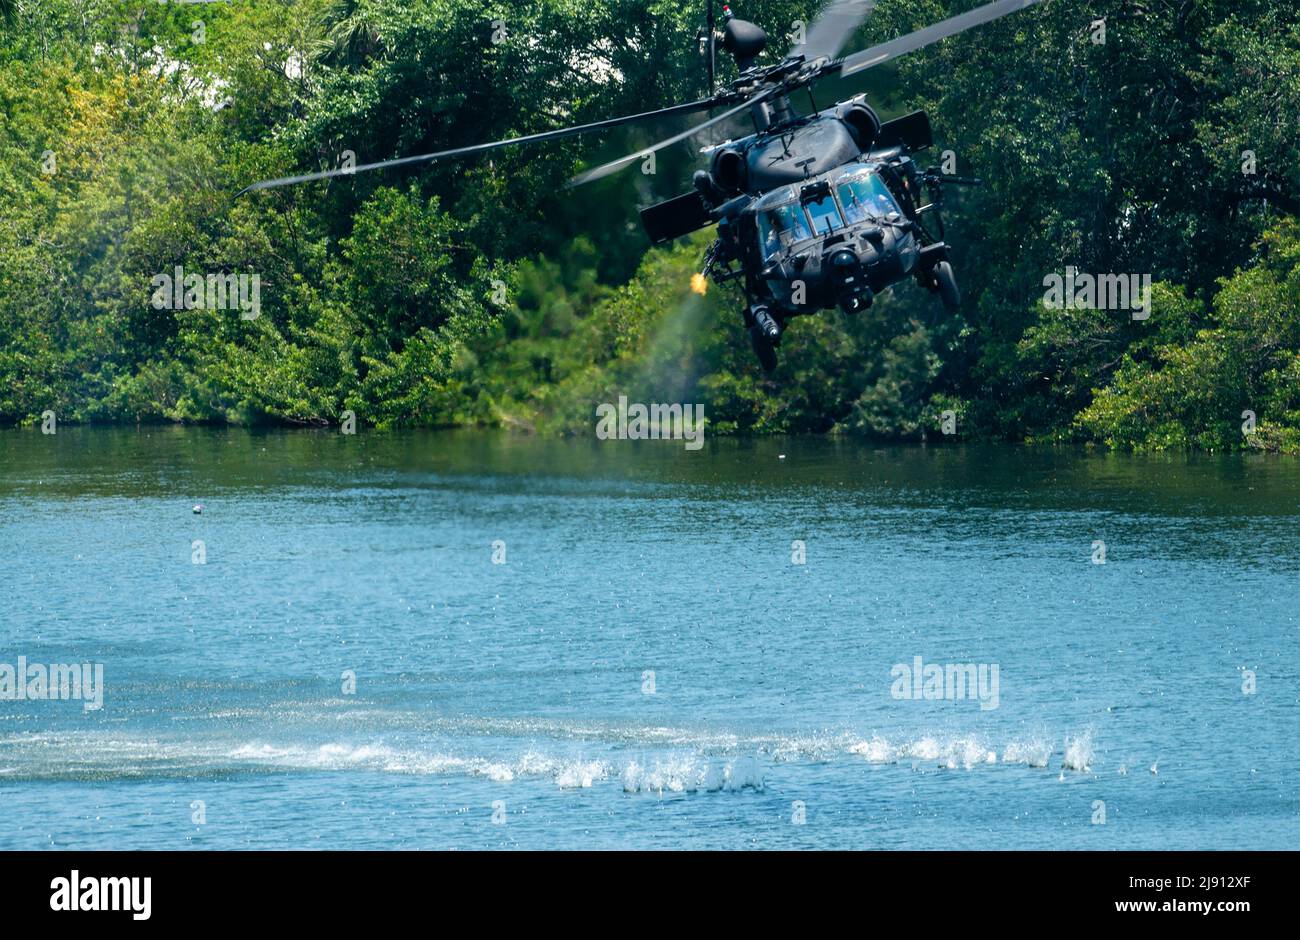 Tampa, United States. 18th May, 2022. U.S. Special Operations Forces commandos perform a simulated attack maneuver in an Army MH-60 helicopter during a public demonstration as part of SOF Week, May 18, 2022 in Tampa, Florida. Credit: SSgt. Alexander Cook/U.S. Air Force/Alamy Live News Stock Photo